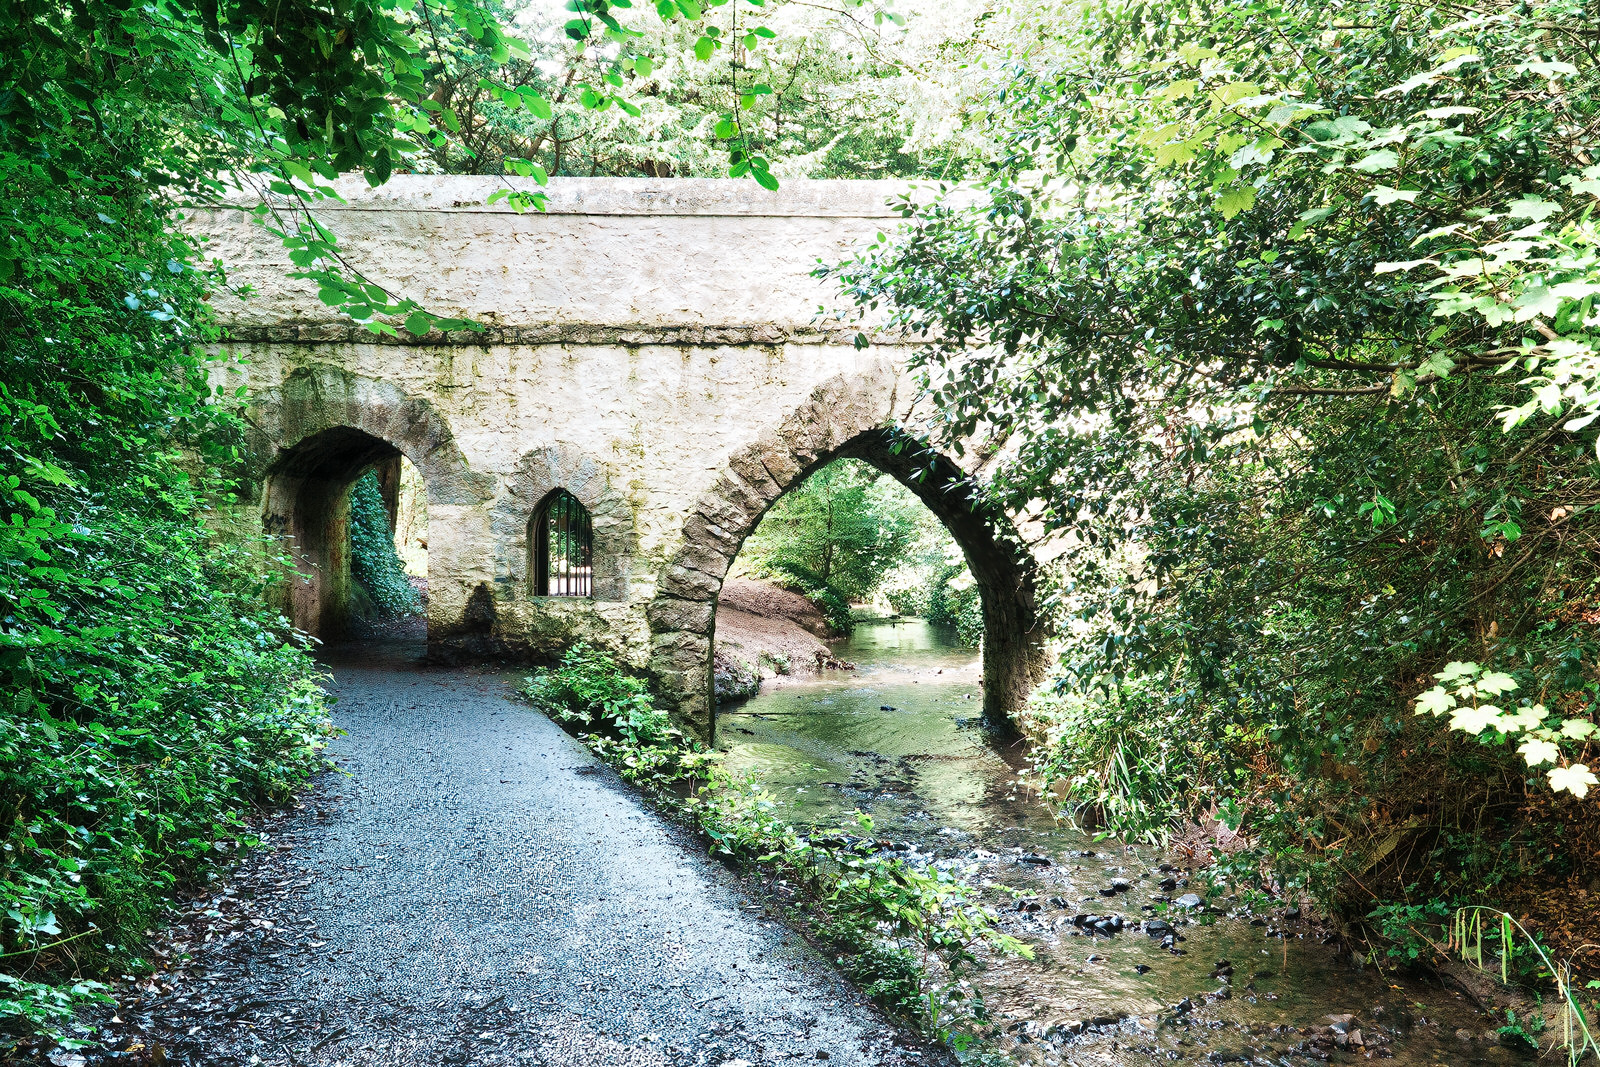 THIS IS CURRENTLY DESCRIBED AS THE GOTHIC BRIDGE [MANY GUIDES REFER TO IT AS THE BRIDGE AND HERMITAGE] 008